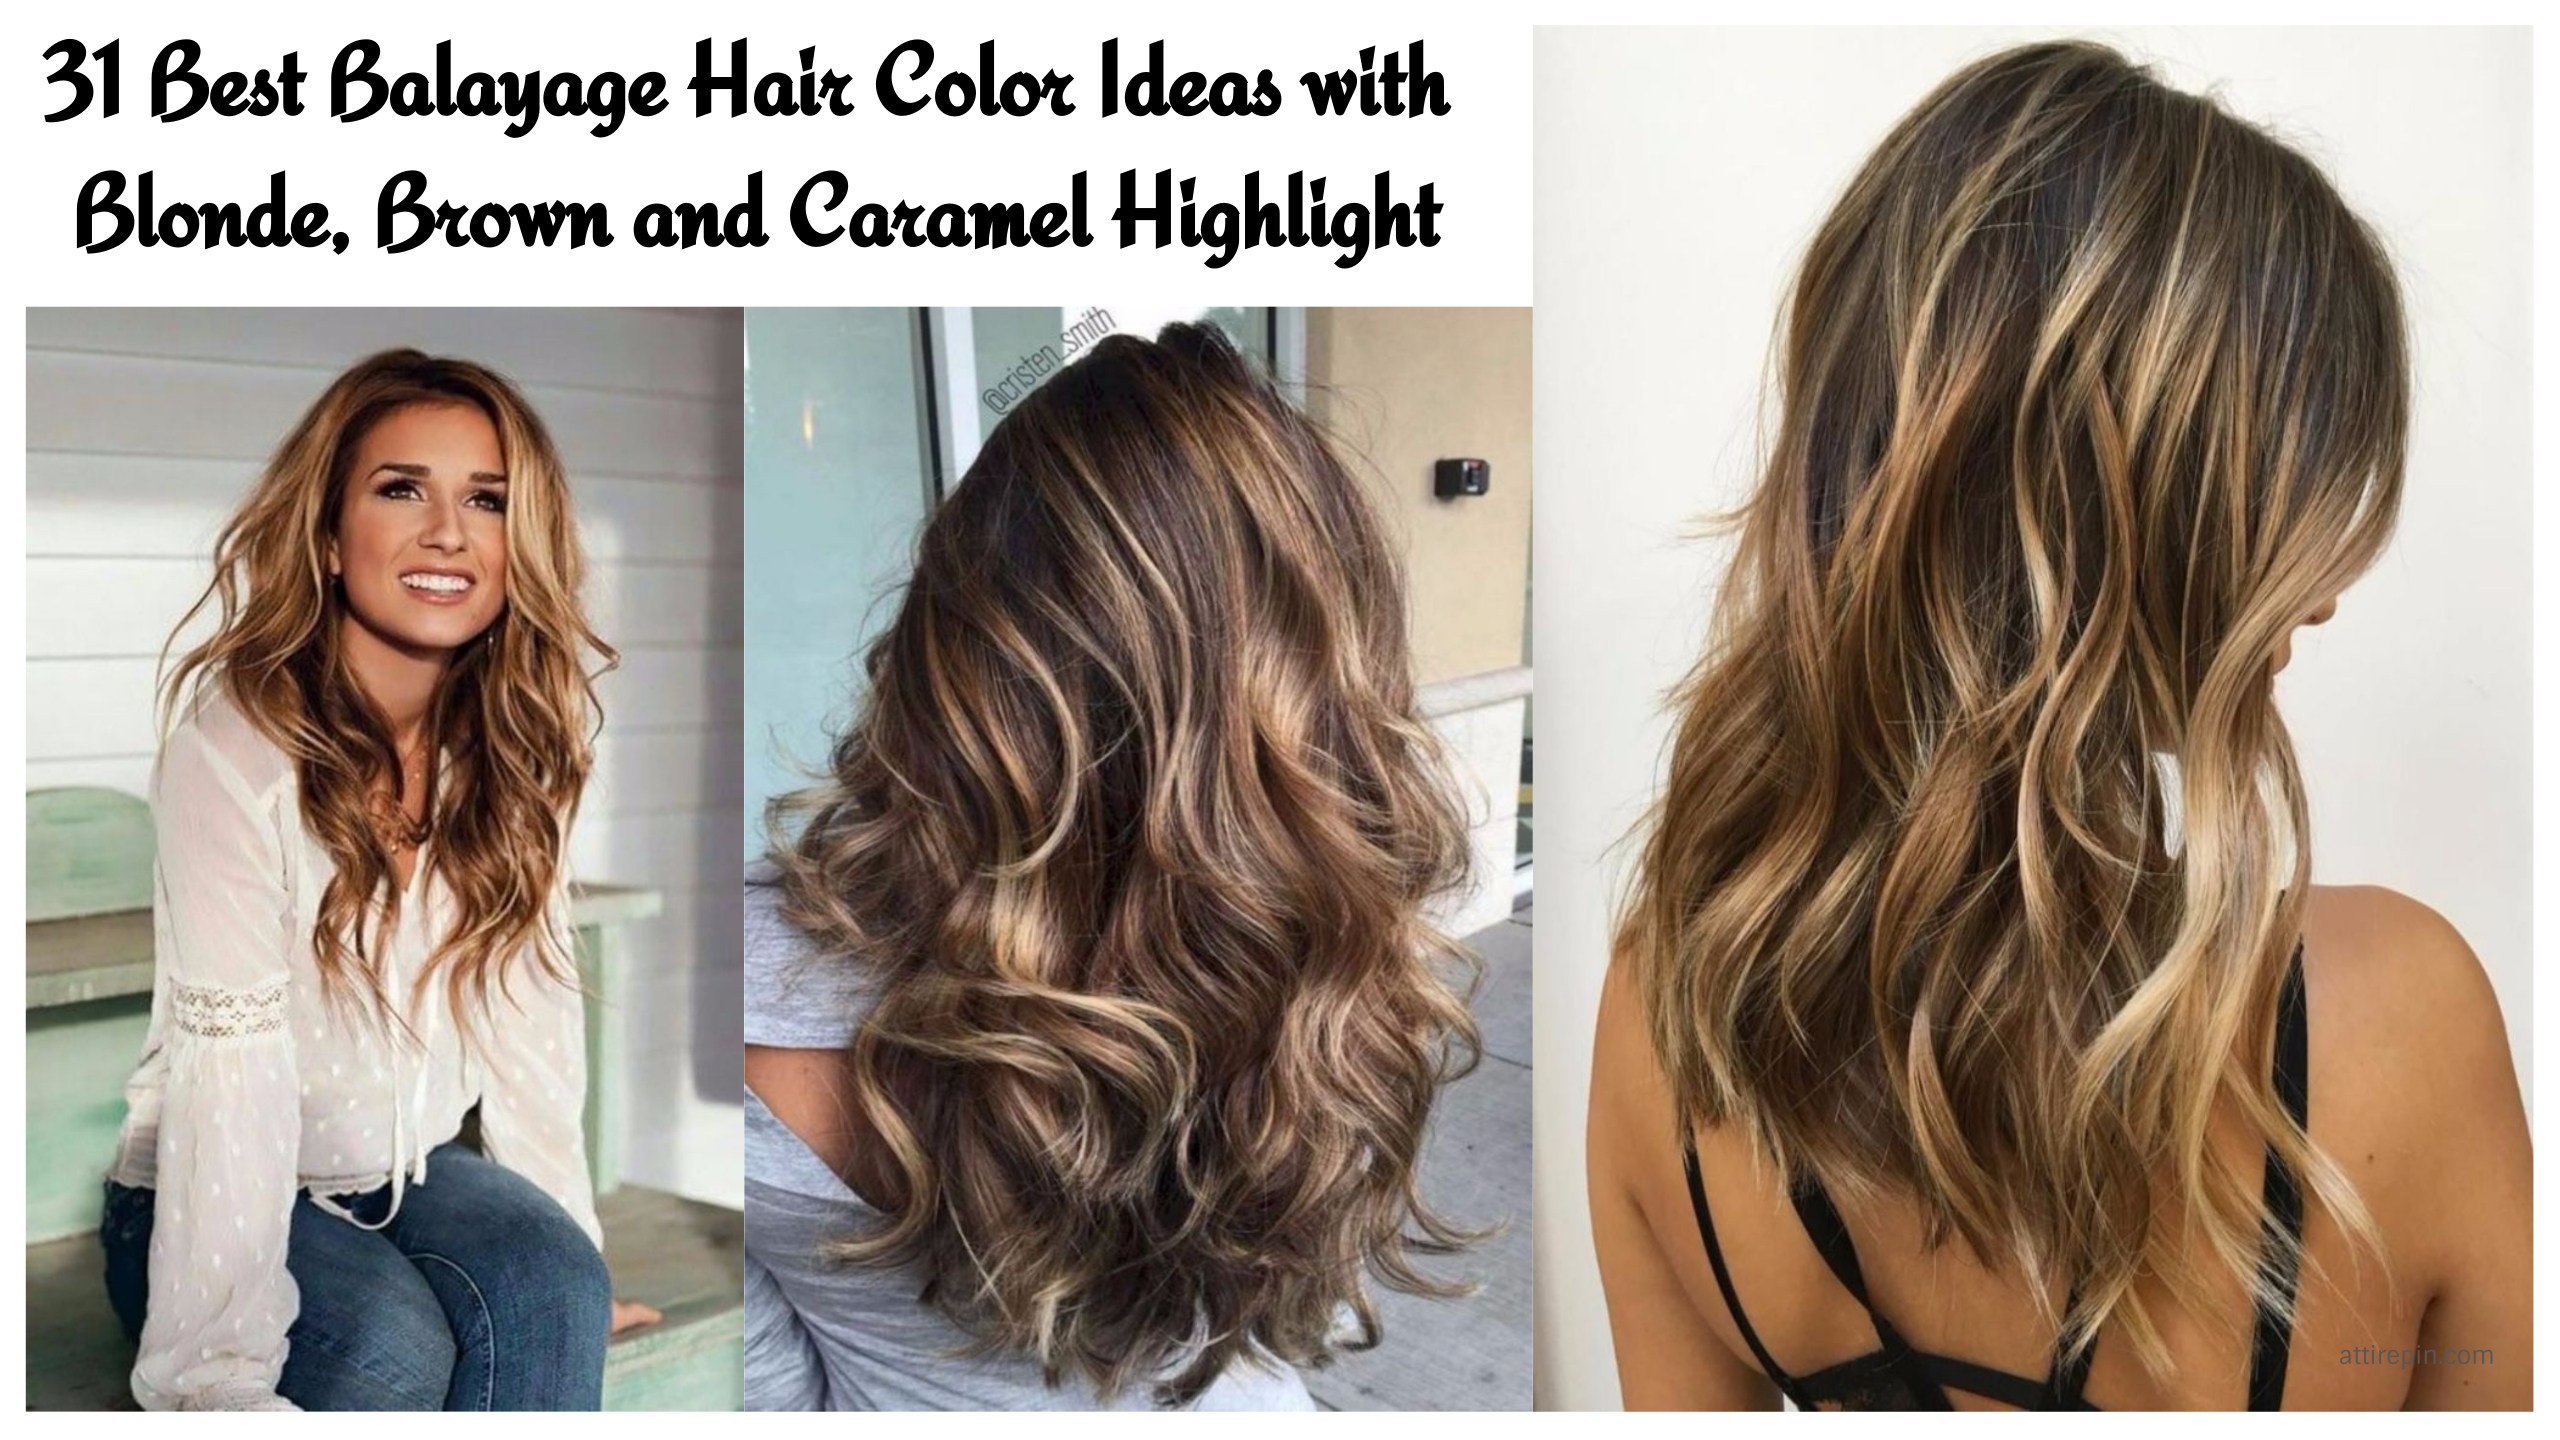 31 Best Balayage Hair Color Ideas with Blonde, Brown and Caramel ...